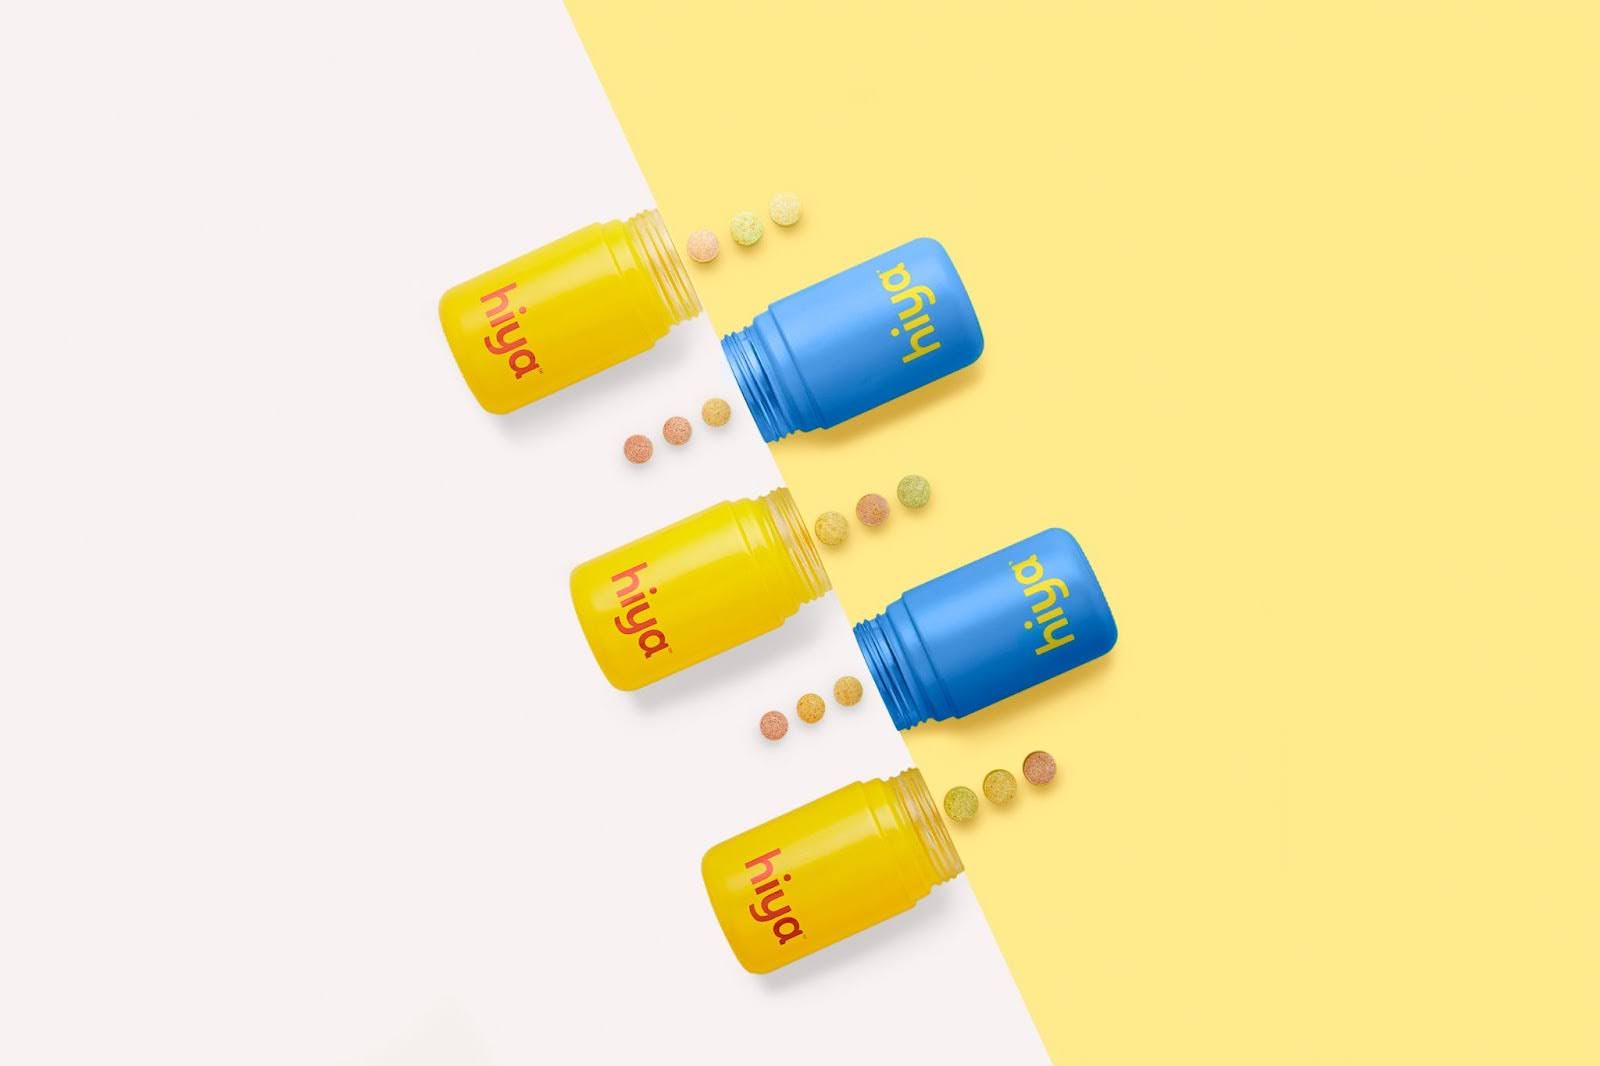 Three yellow Hiya Kids Daily Multivitamin bottles and two blue Hiya Kids Bedtime Essentials bottles open and face each other, with chewable vitamins in front of them.